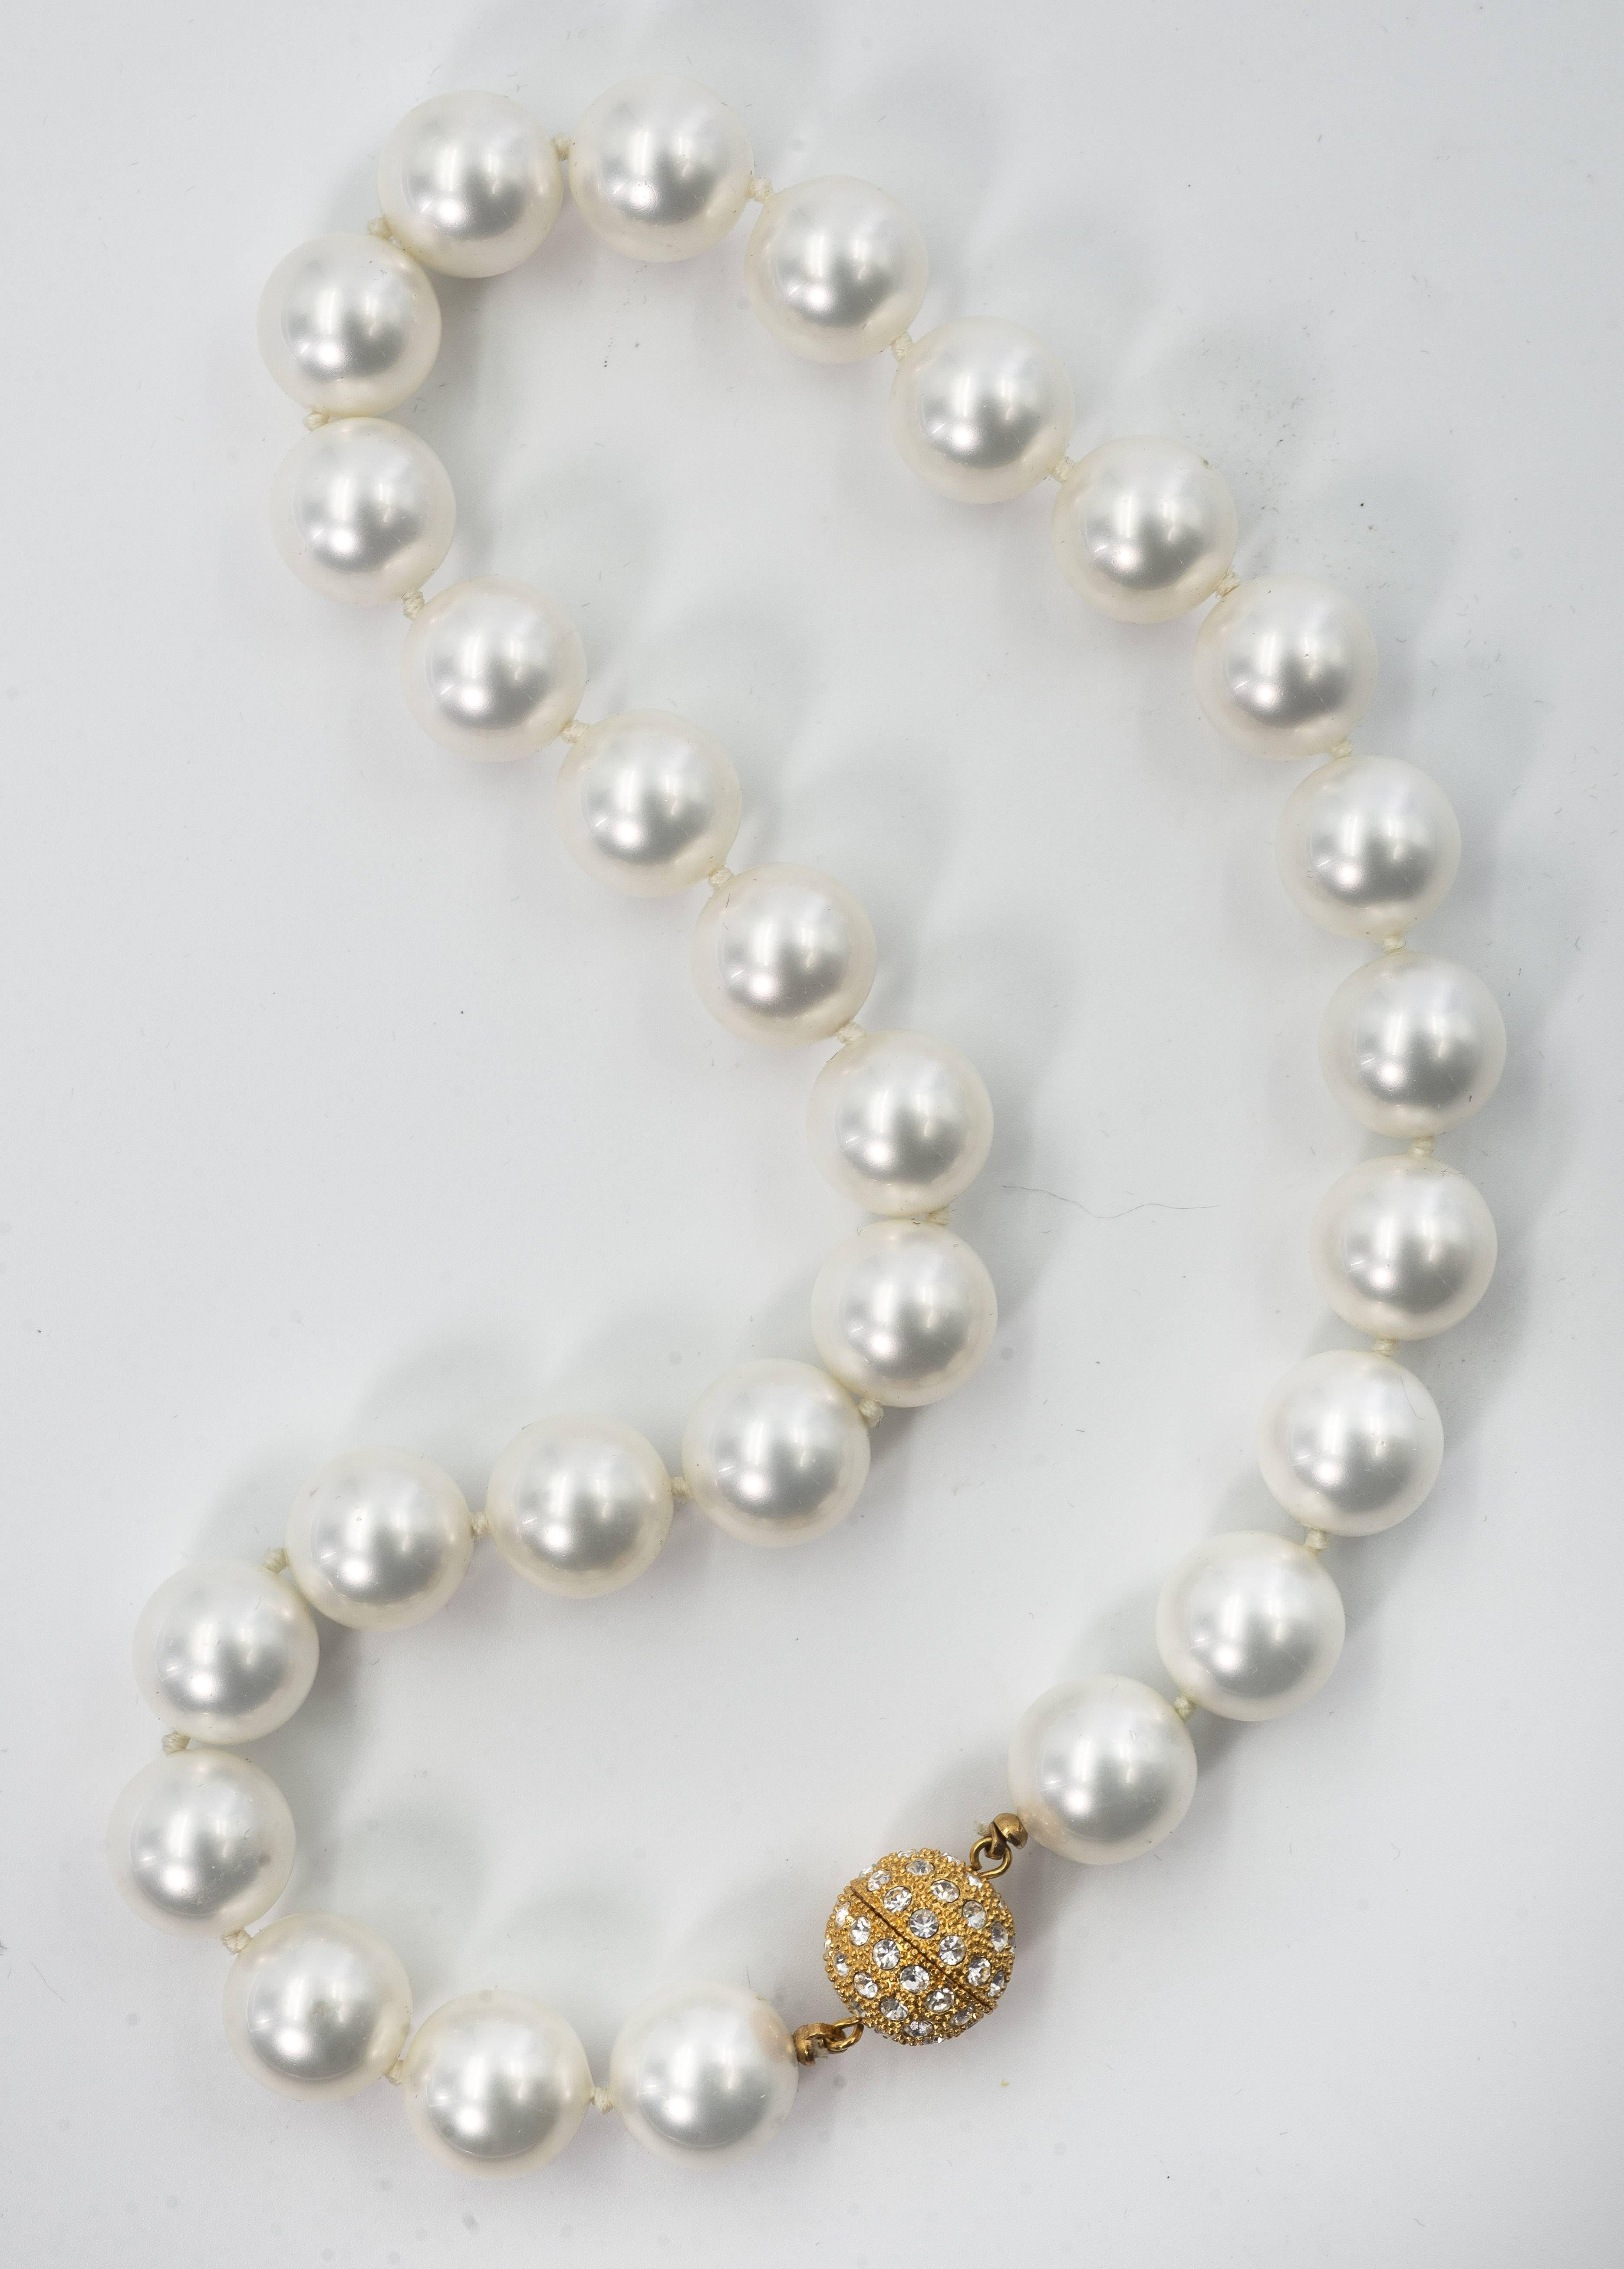 Wonderful delicate white shade of handmade lustrous Japanese faux pearls beautifully  strung 14mm 17'' long with pave Cub Zircon screw ball clasp.